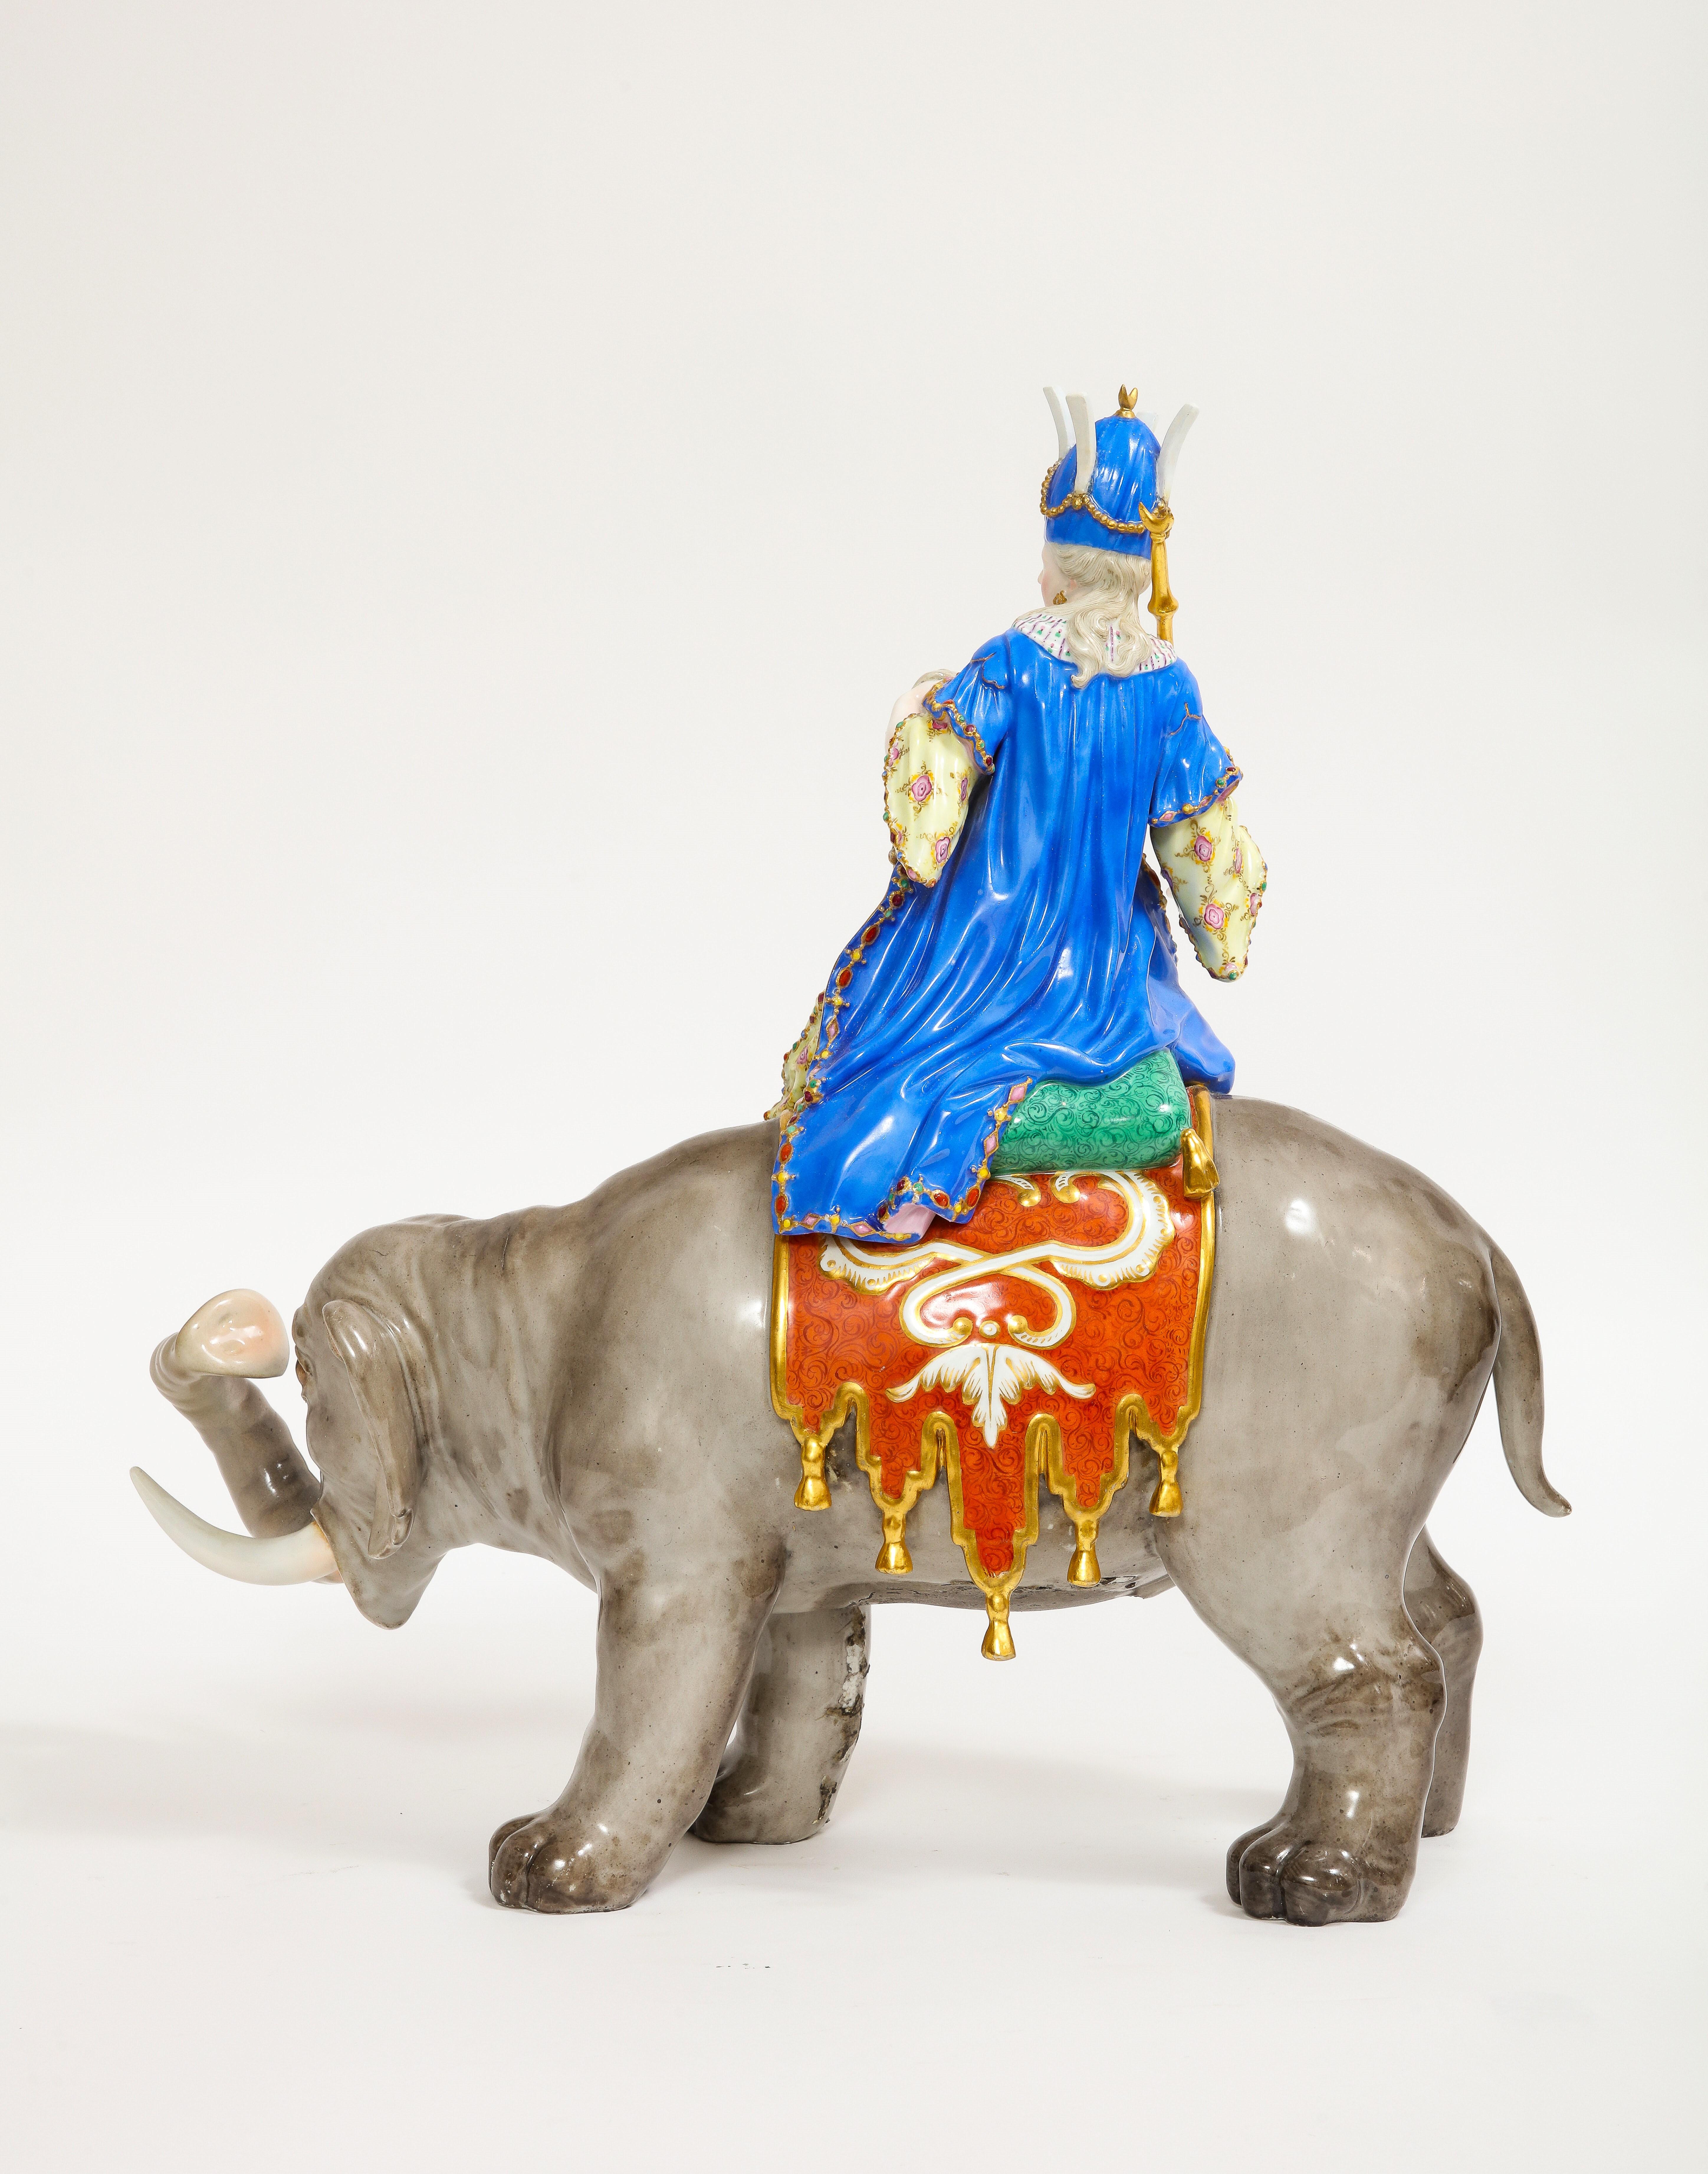 19th C. Meissen Porcelain Figure of a Sultana Riding an Elephant with a Crown For Sale 1